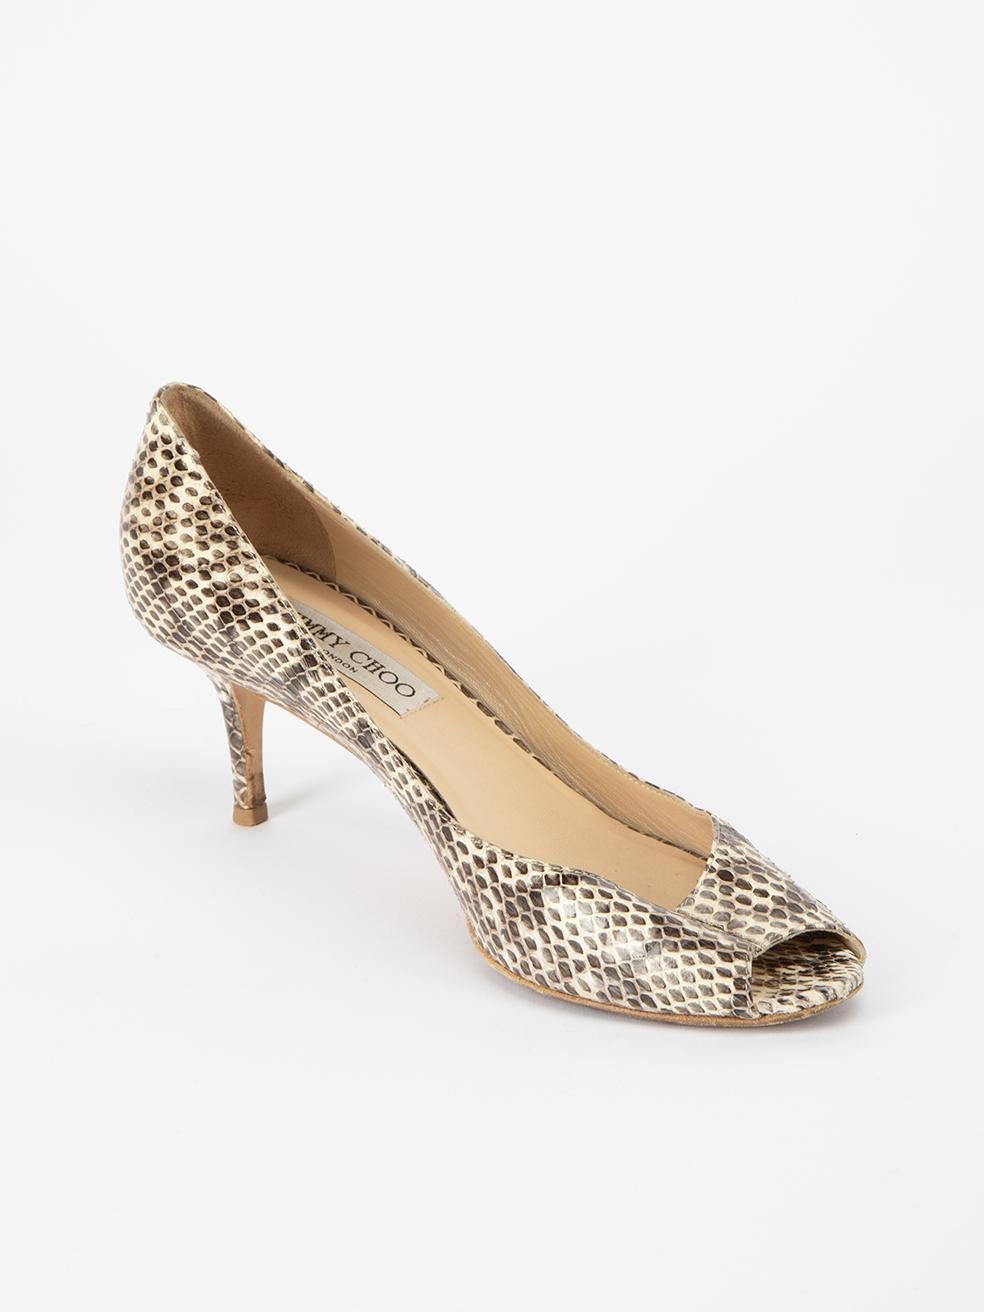 CONDITION is Very good. Minimal wear to shoes is evident. Wear to inner suede material and inner left heel tip on this used Jimmy Choo designer resale item. This item comes with original dustbag.
 
 Details
  Grey
 Snakeskin leather
 Slip on heels
